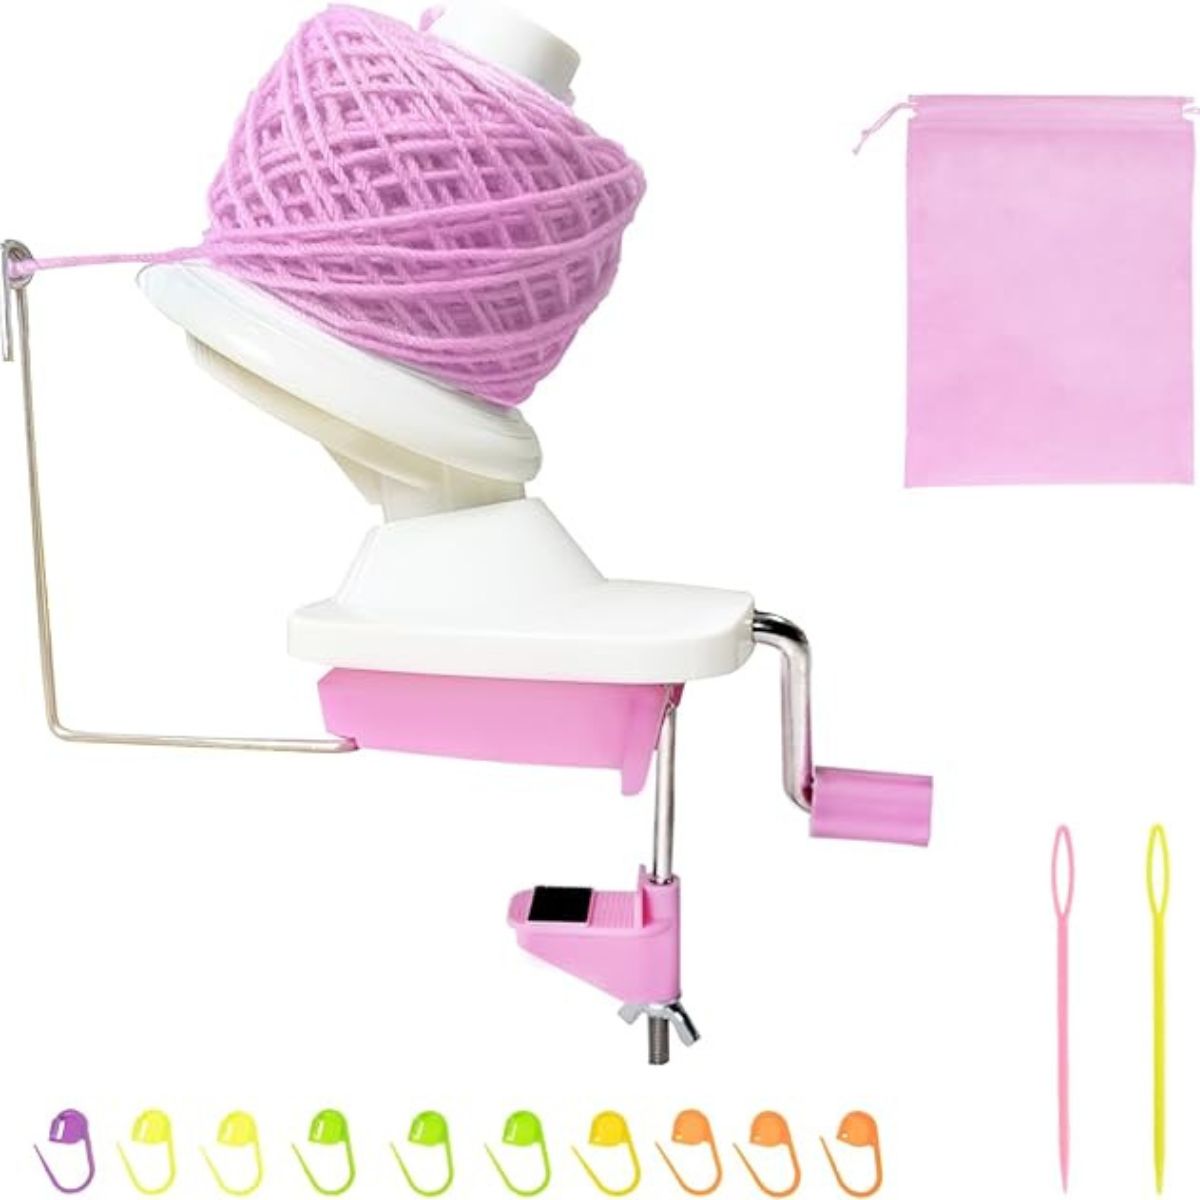 Attractive Yarn Ball Winder with Marking Button and Needle